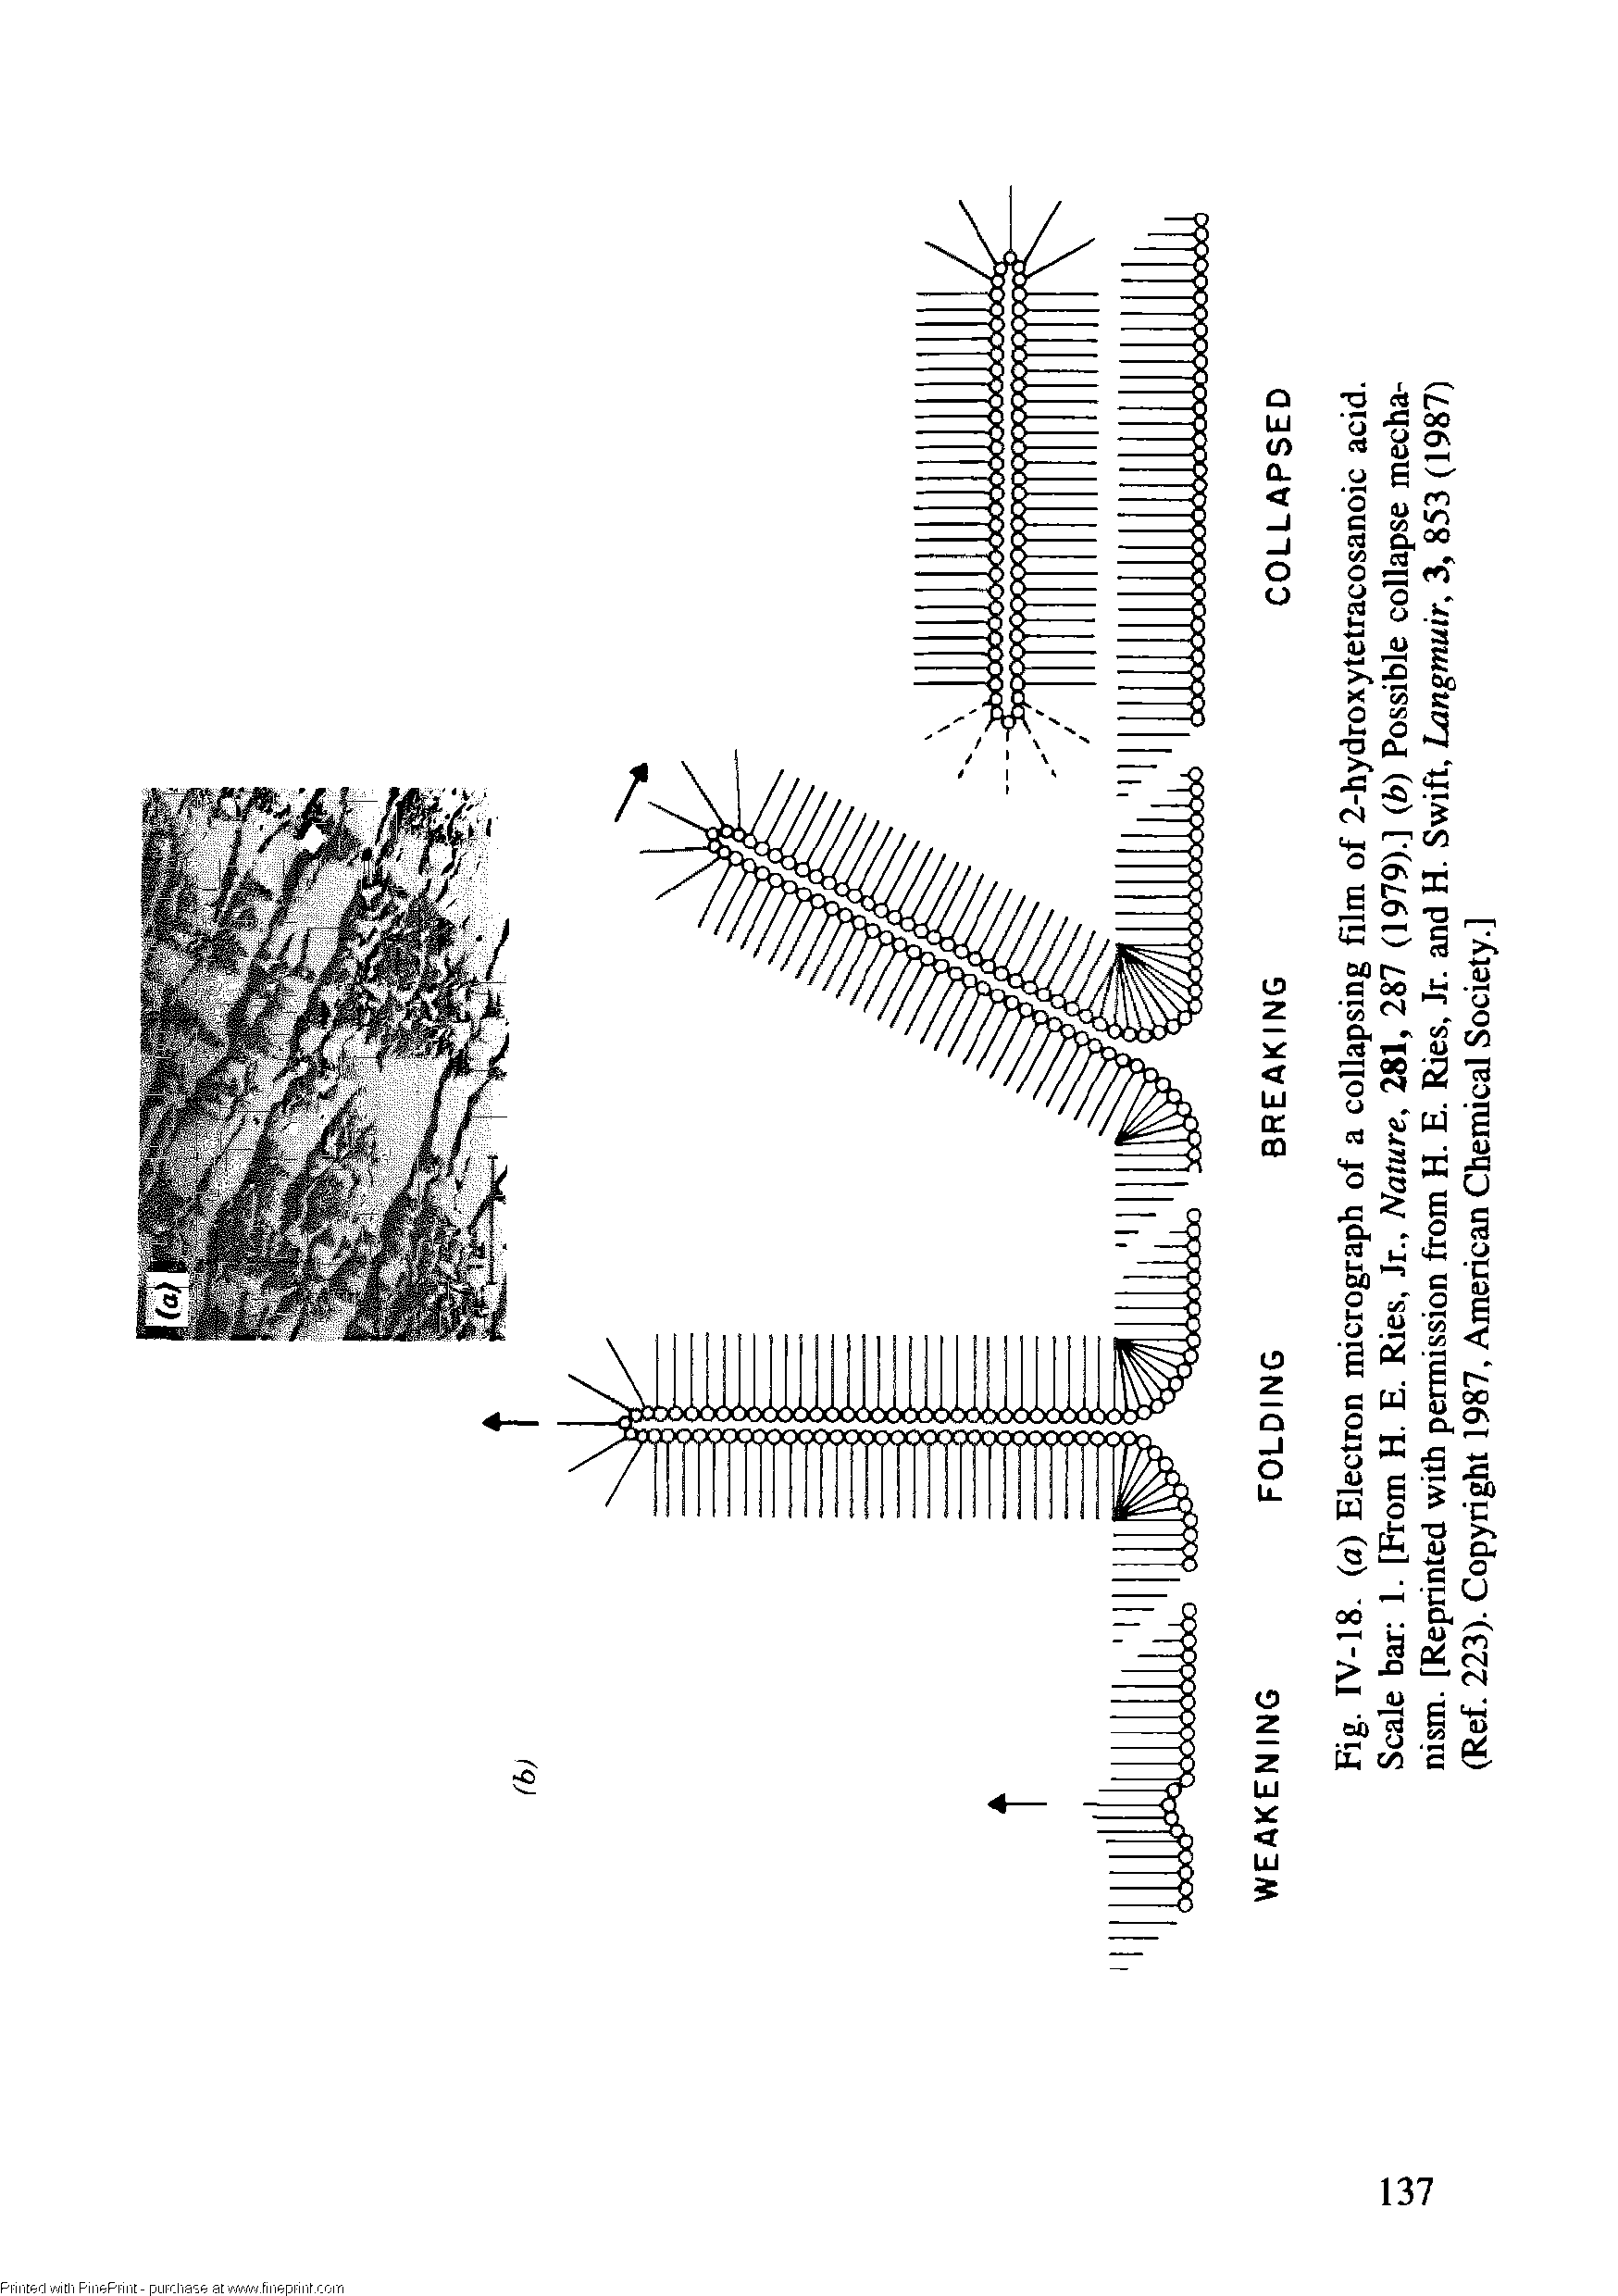 Fig. IV-18. (a) Electron micrograph of a collapsing film of 2-hydroxytetracosanoic acid. Scale bar 1. [From H. E. Ries, Jr., Nature, 281, 287 (1979).] (b) Possible collapse mechanism. [Reprinted with permission from H. E. Ries, Jr. and H. Swift, Langmuir, 3, 853 (1987) (Ref. 223). Copyright 1987, American Chemical Society.]...